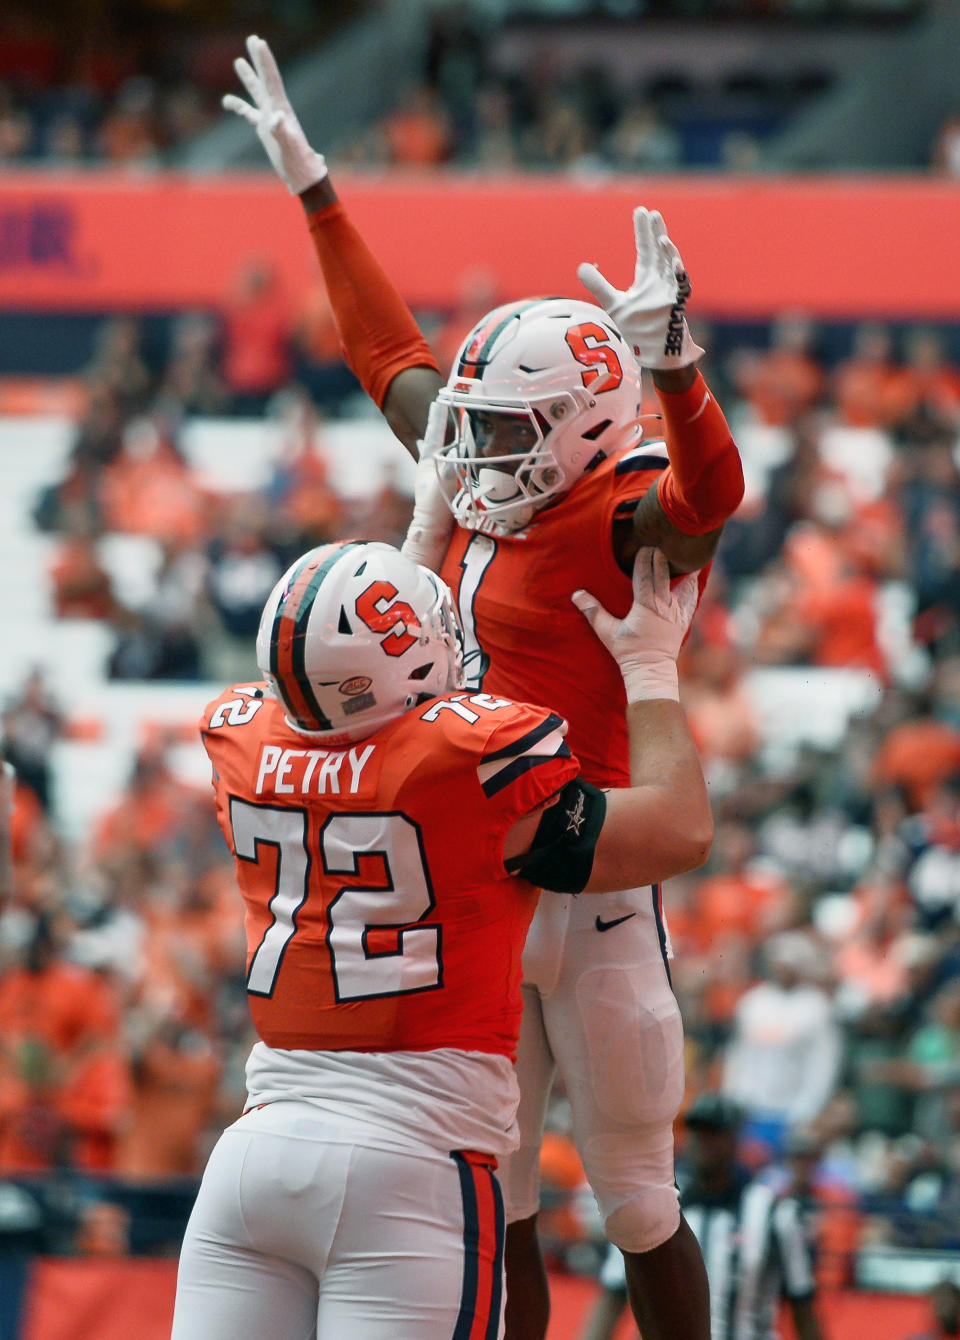 Syracuse running back LeQuint Allen Jr., top, celebrates with offensive lineman Mark Petry (72) after scoring during the first half of an NCAA college football game against Western Michigan in Syracuse, N.Y., Saturday, Sept. 9, 2023. (AP Photo/Adrian Kraus)